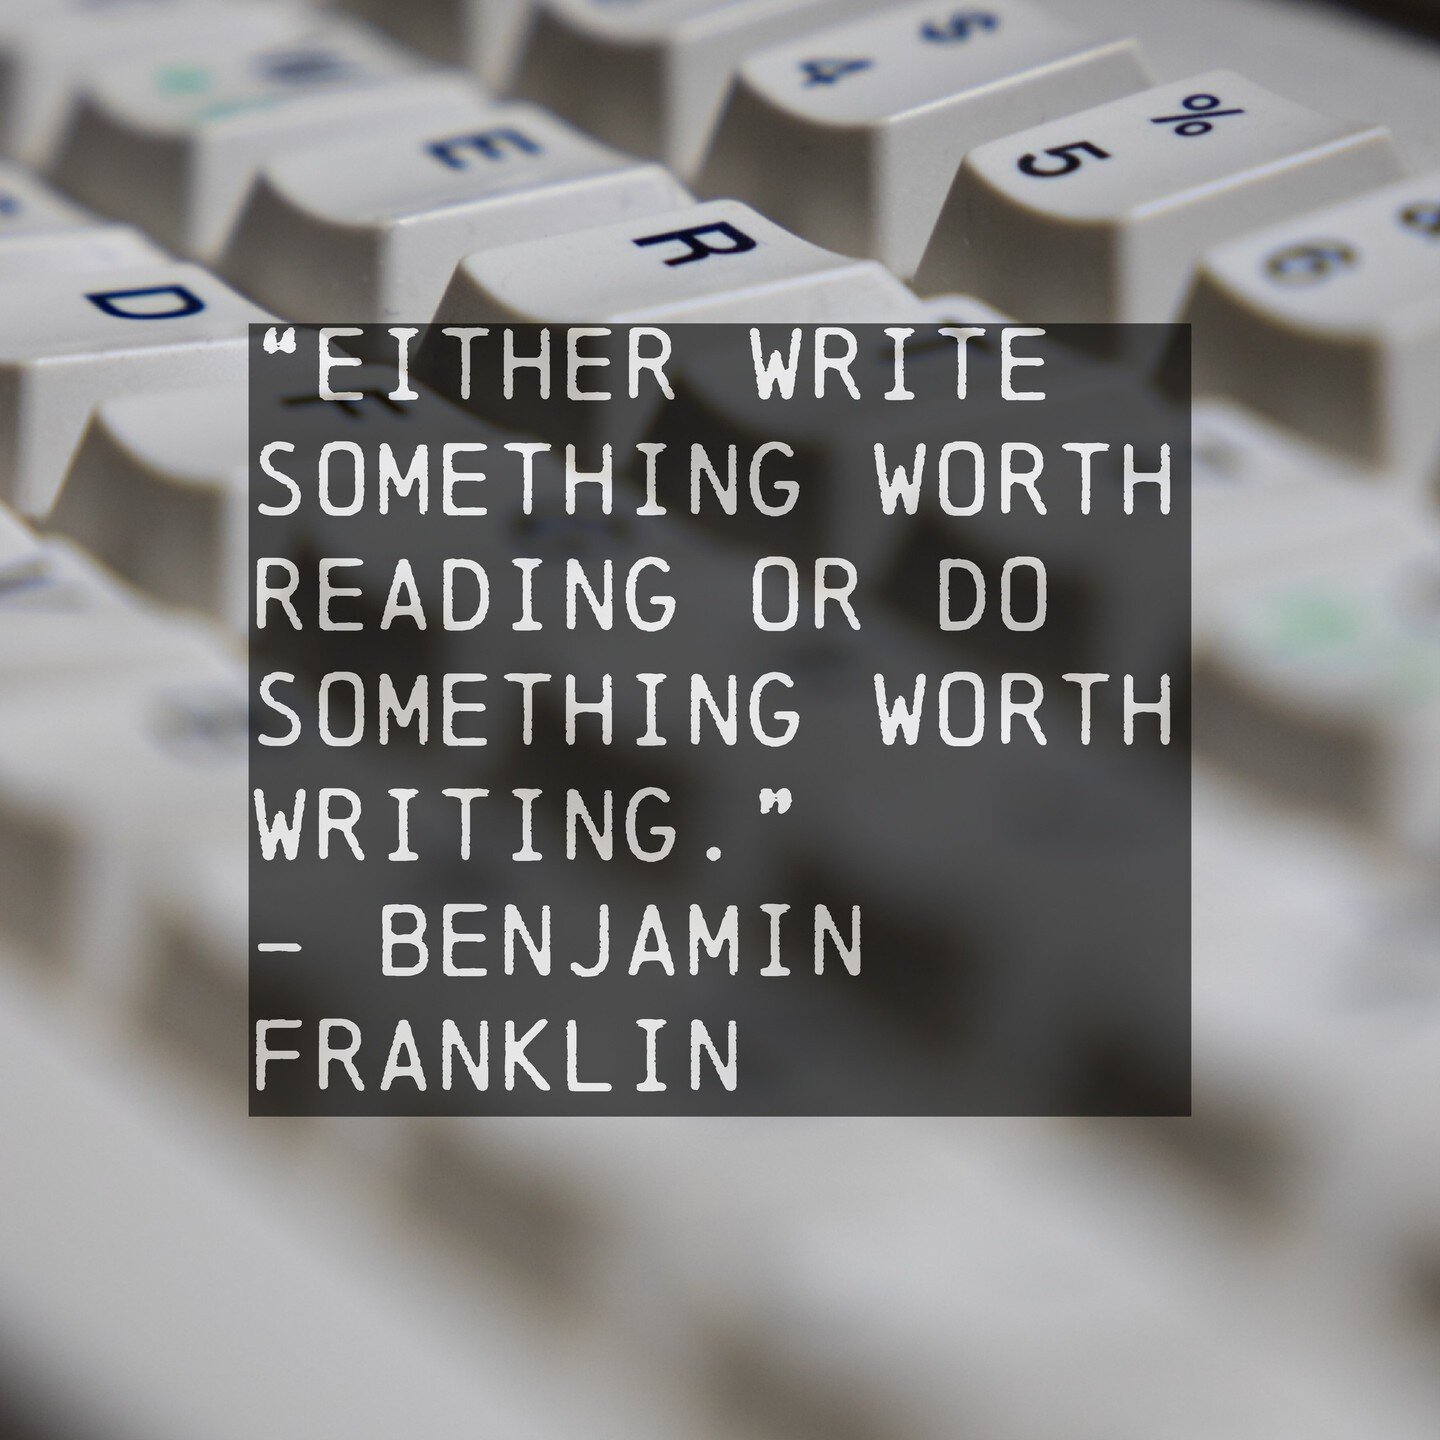 Today&rsquo;s Quote Of The Day comes from the one and only Benjamin Franklin. www.ThomasKelleherWrites.com⁠
⁠
Follow 👉 @thomaskelleherwrites 👈⁠
⁠
#thomaskelleherwrites #author #authors #writing #writer #writers #authorsofinstagram #writersofinstagr